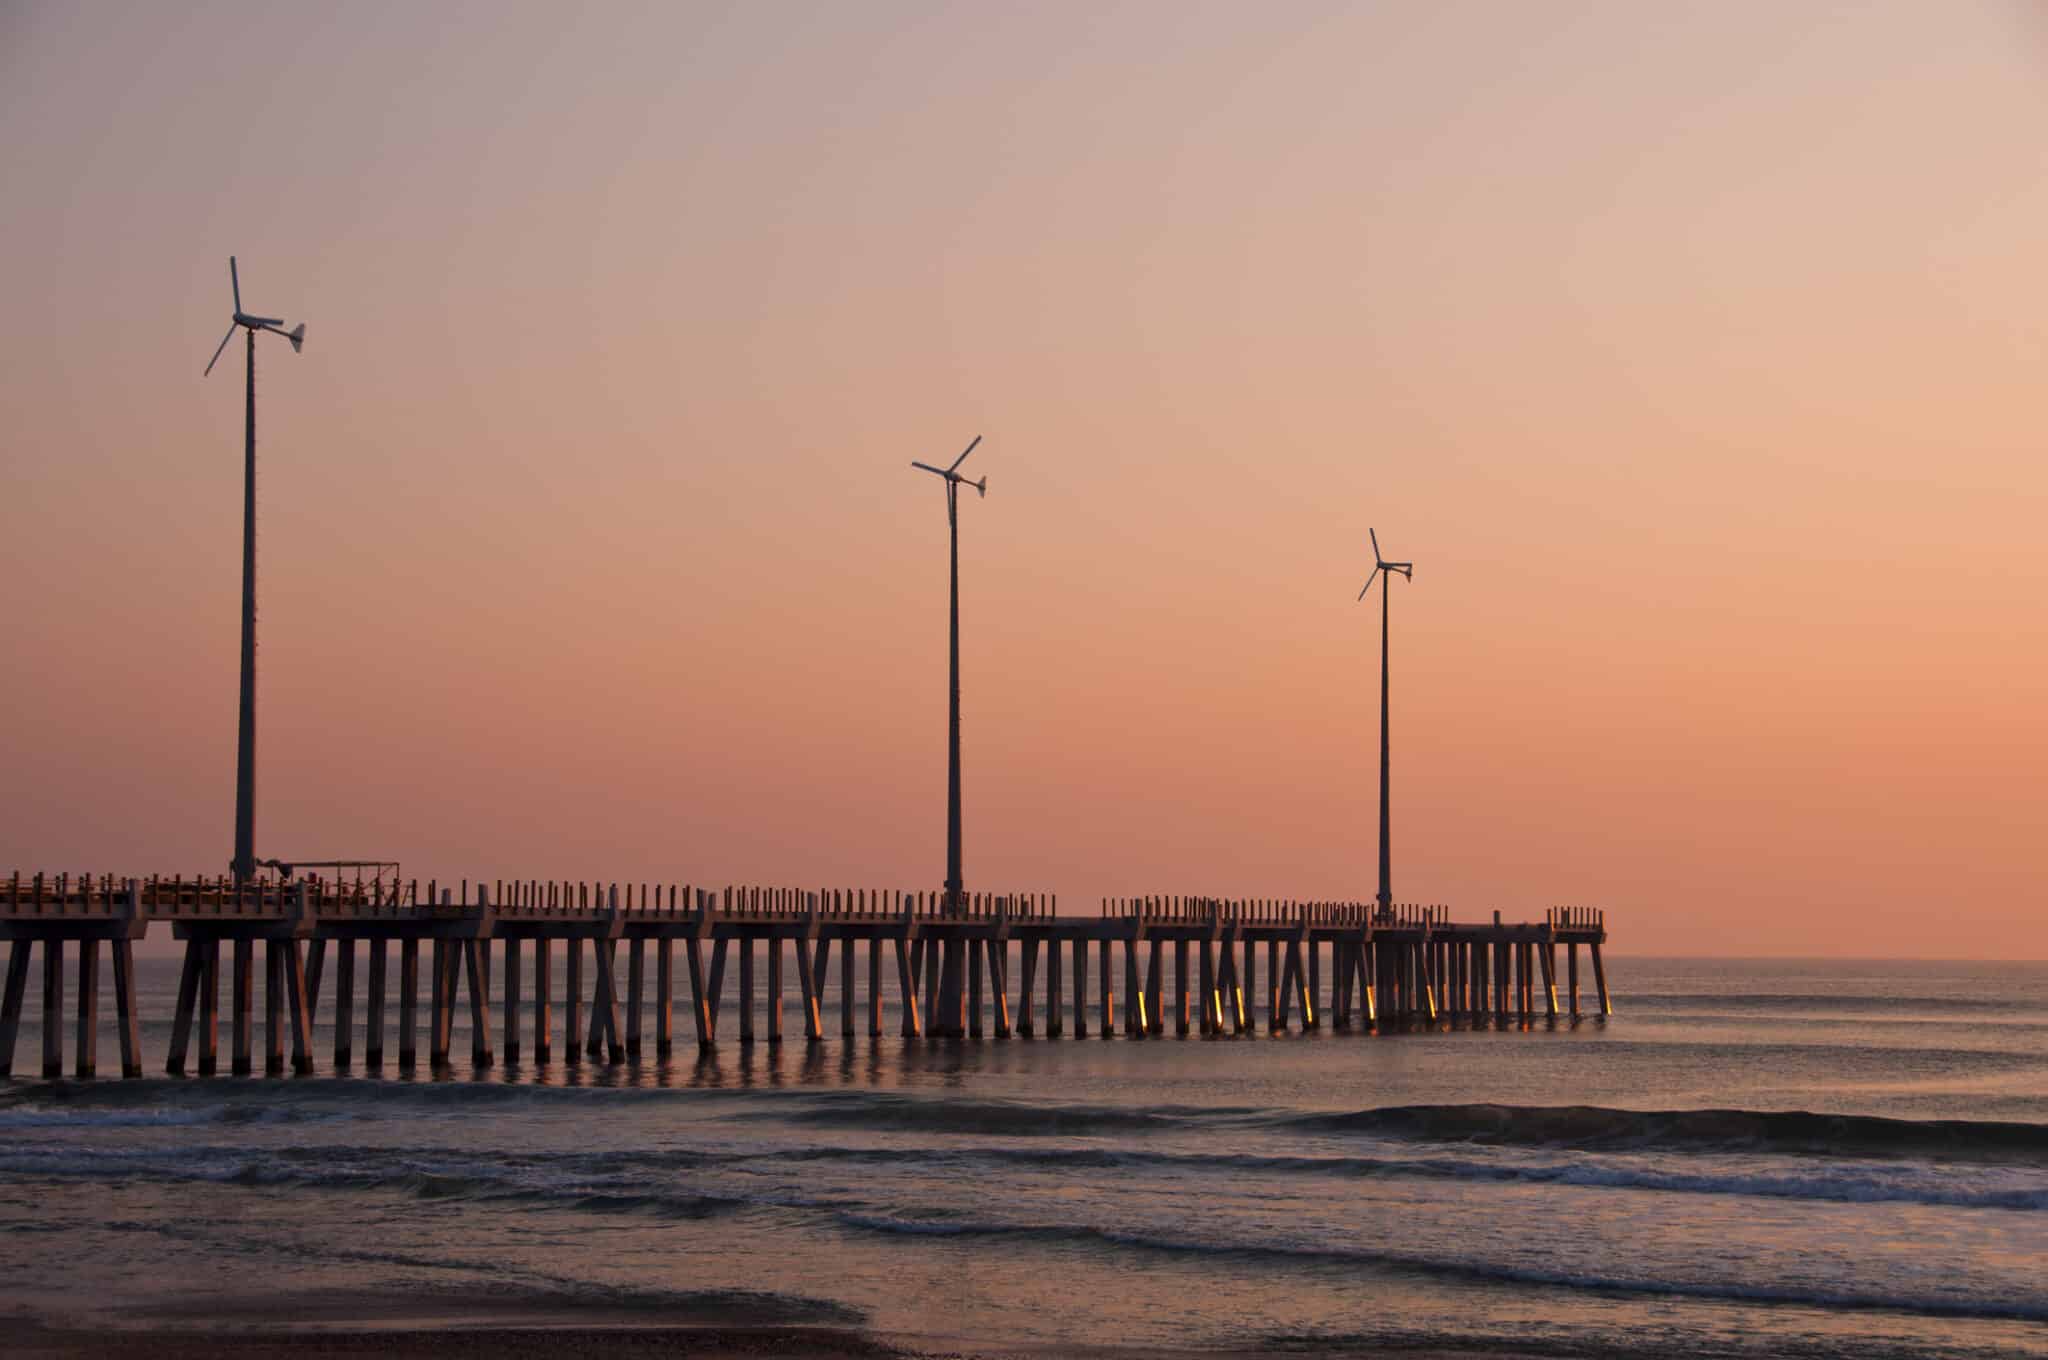 USA, North Carolina, Outer Banks, Kill Devil Hills, pier with wind turbines at sunset